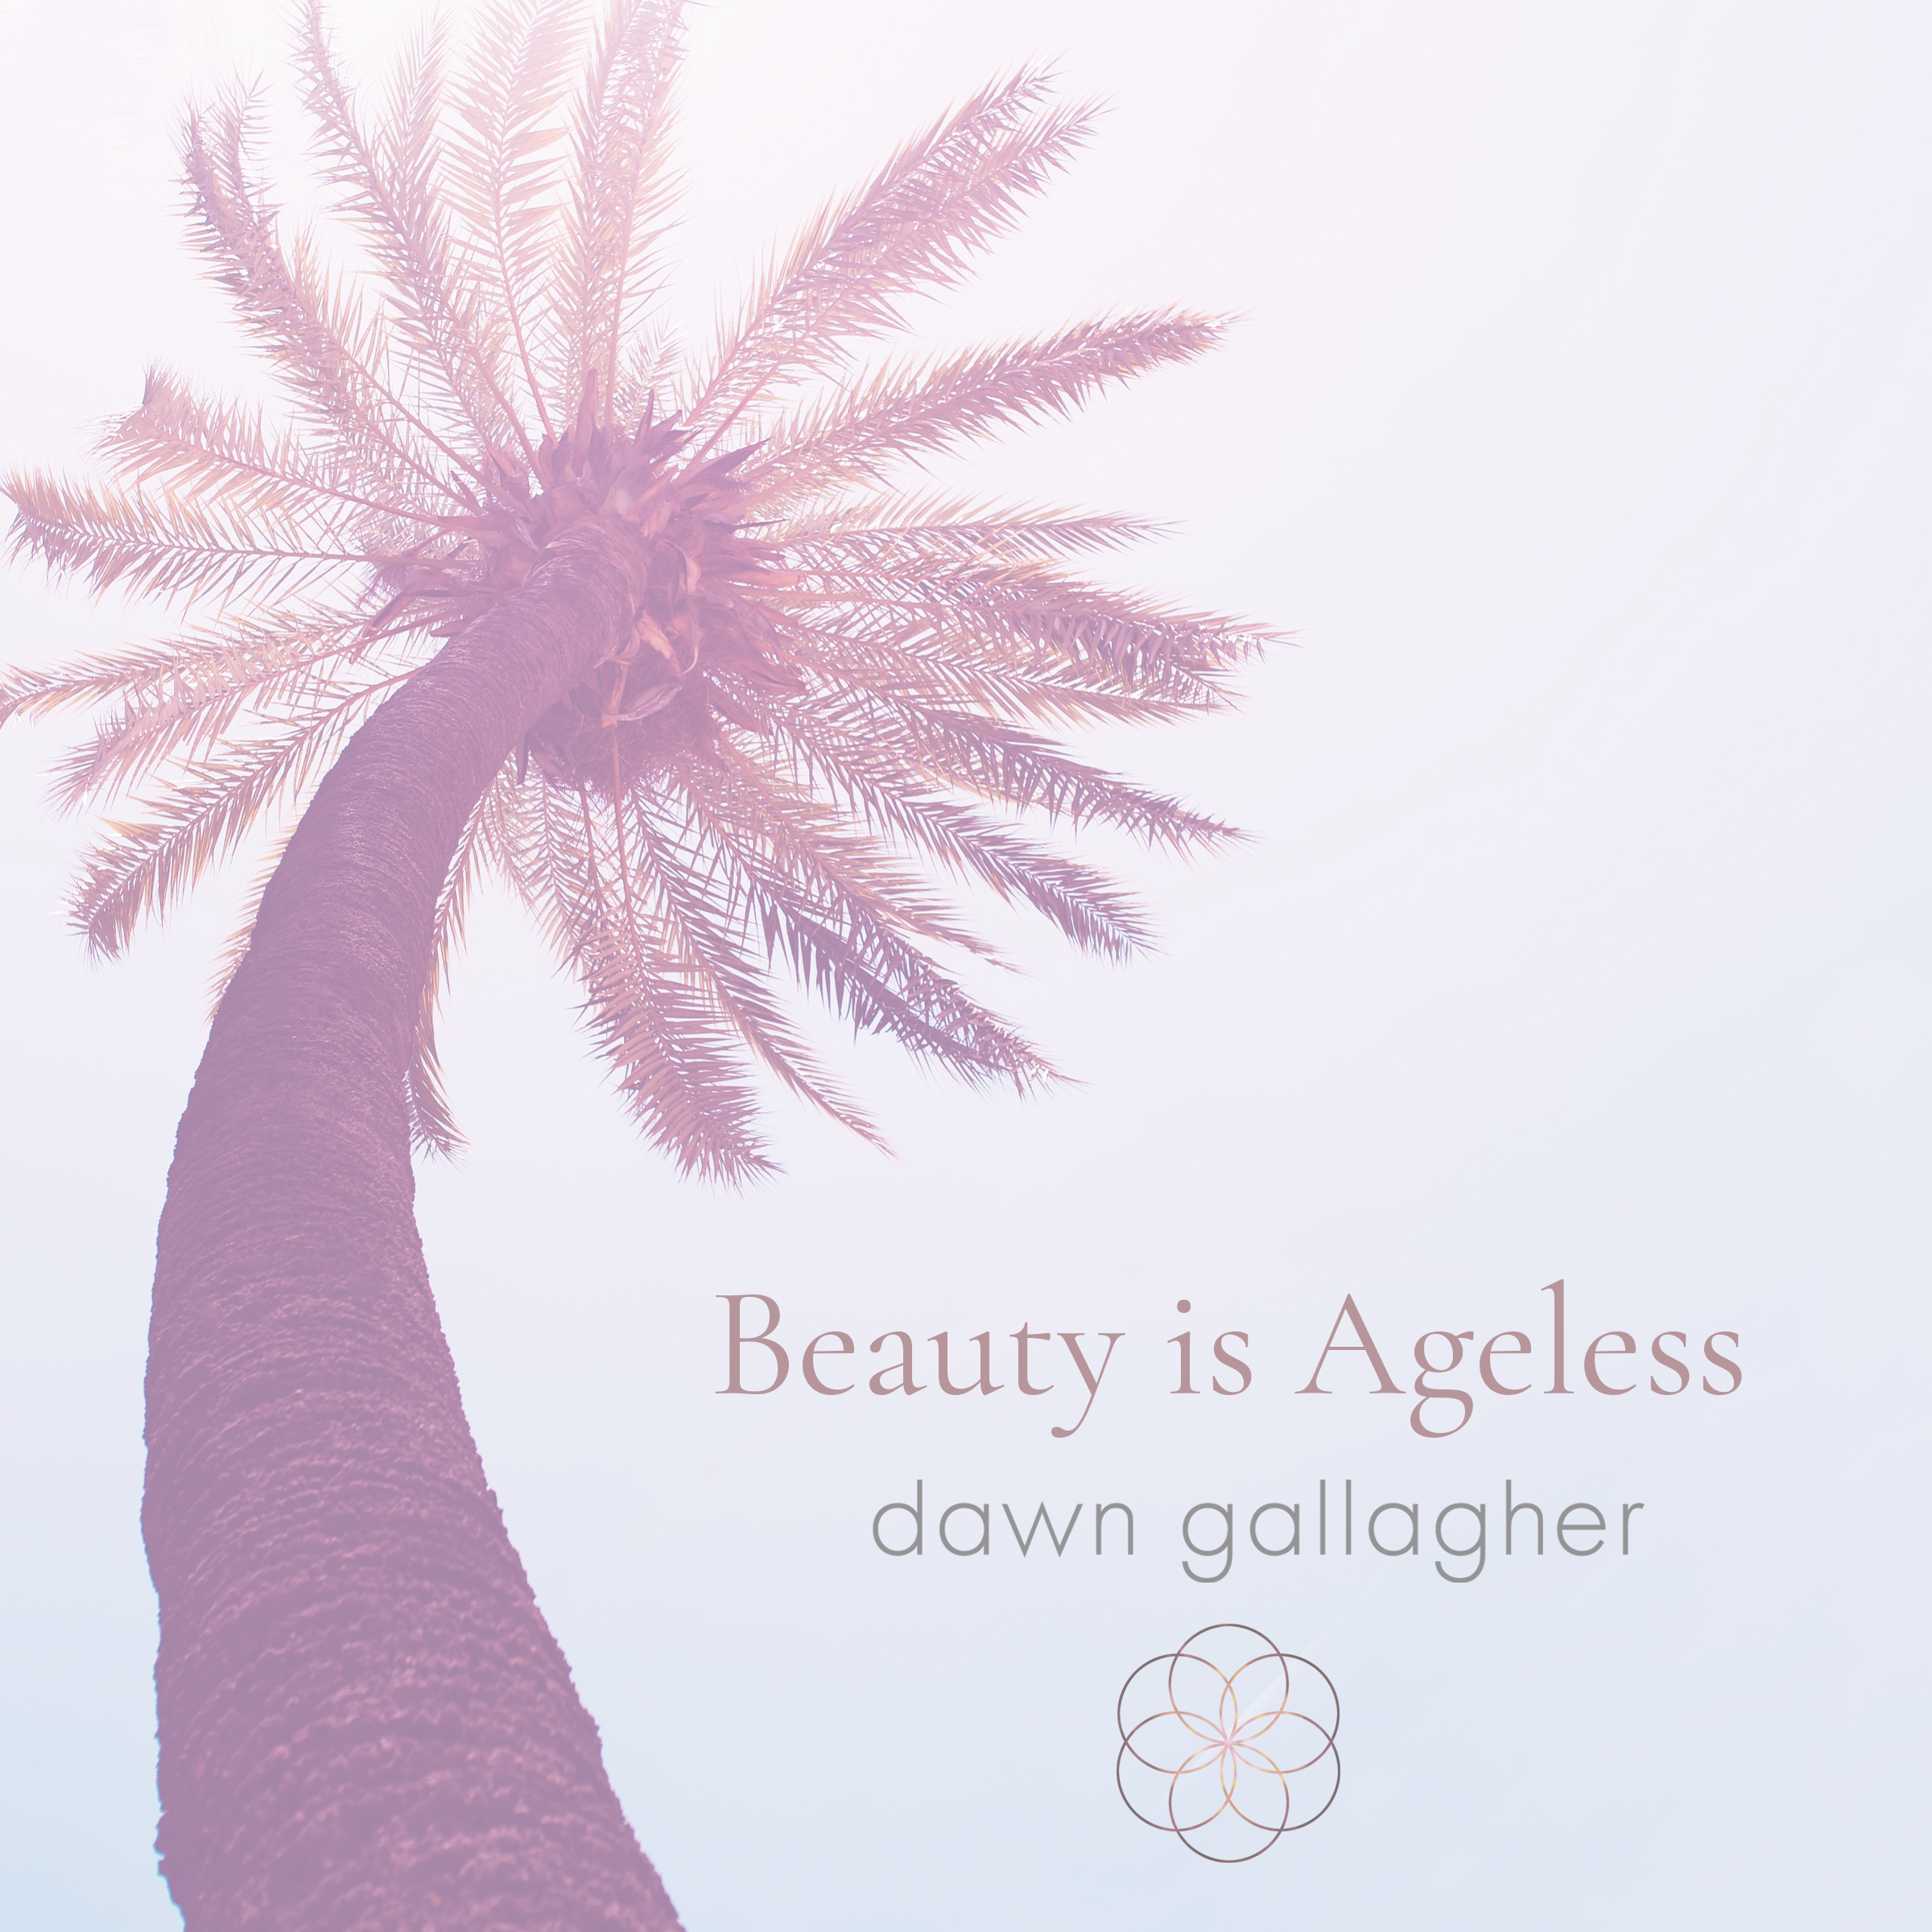 dawn gallagher social media square beauty is ageless palm tree.png